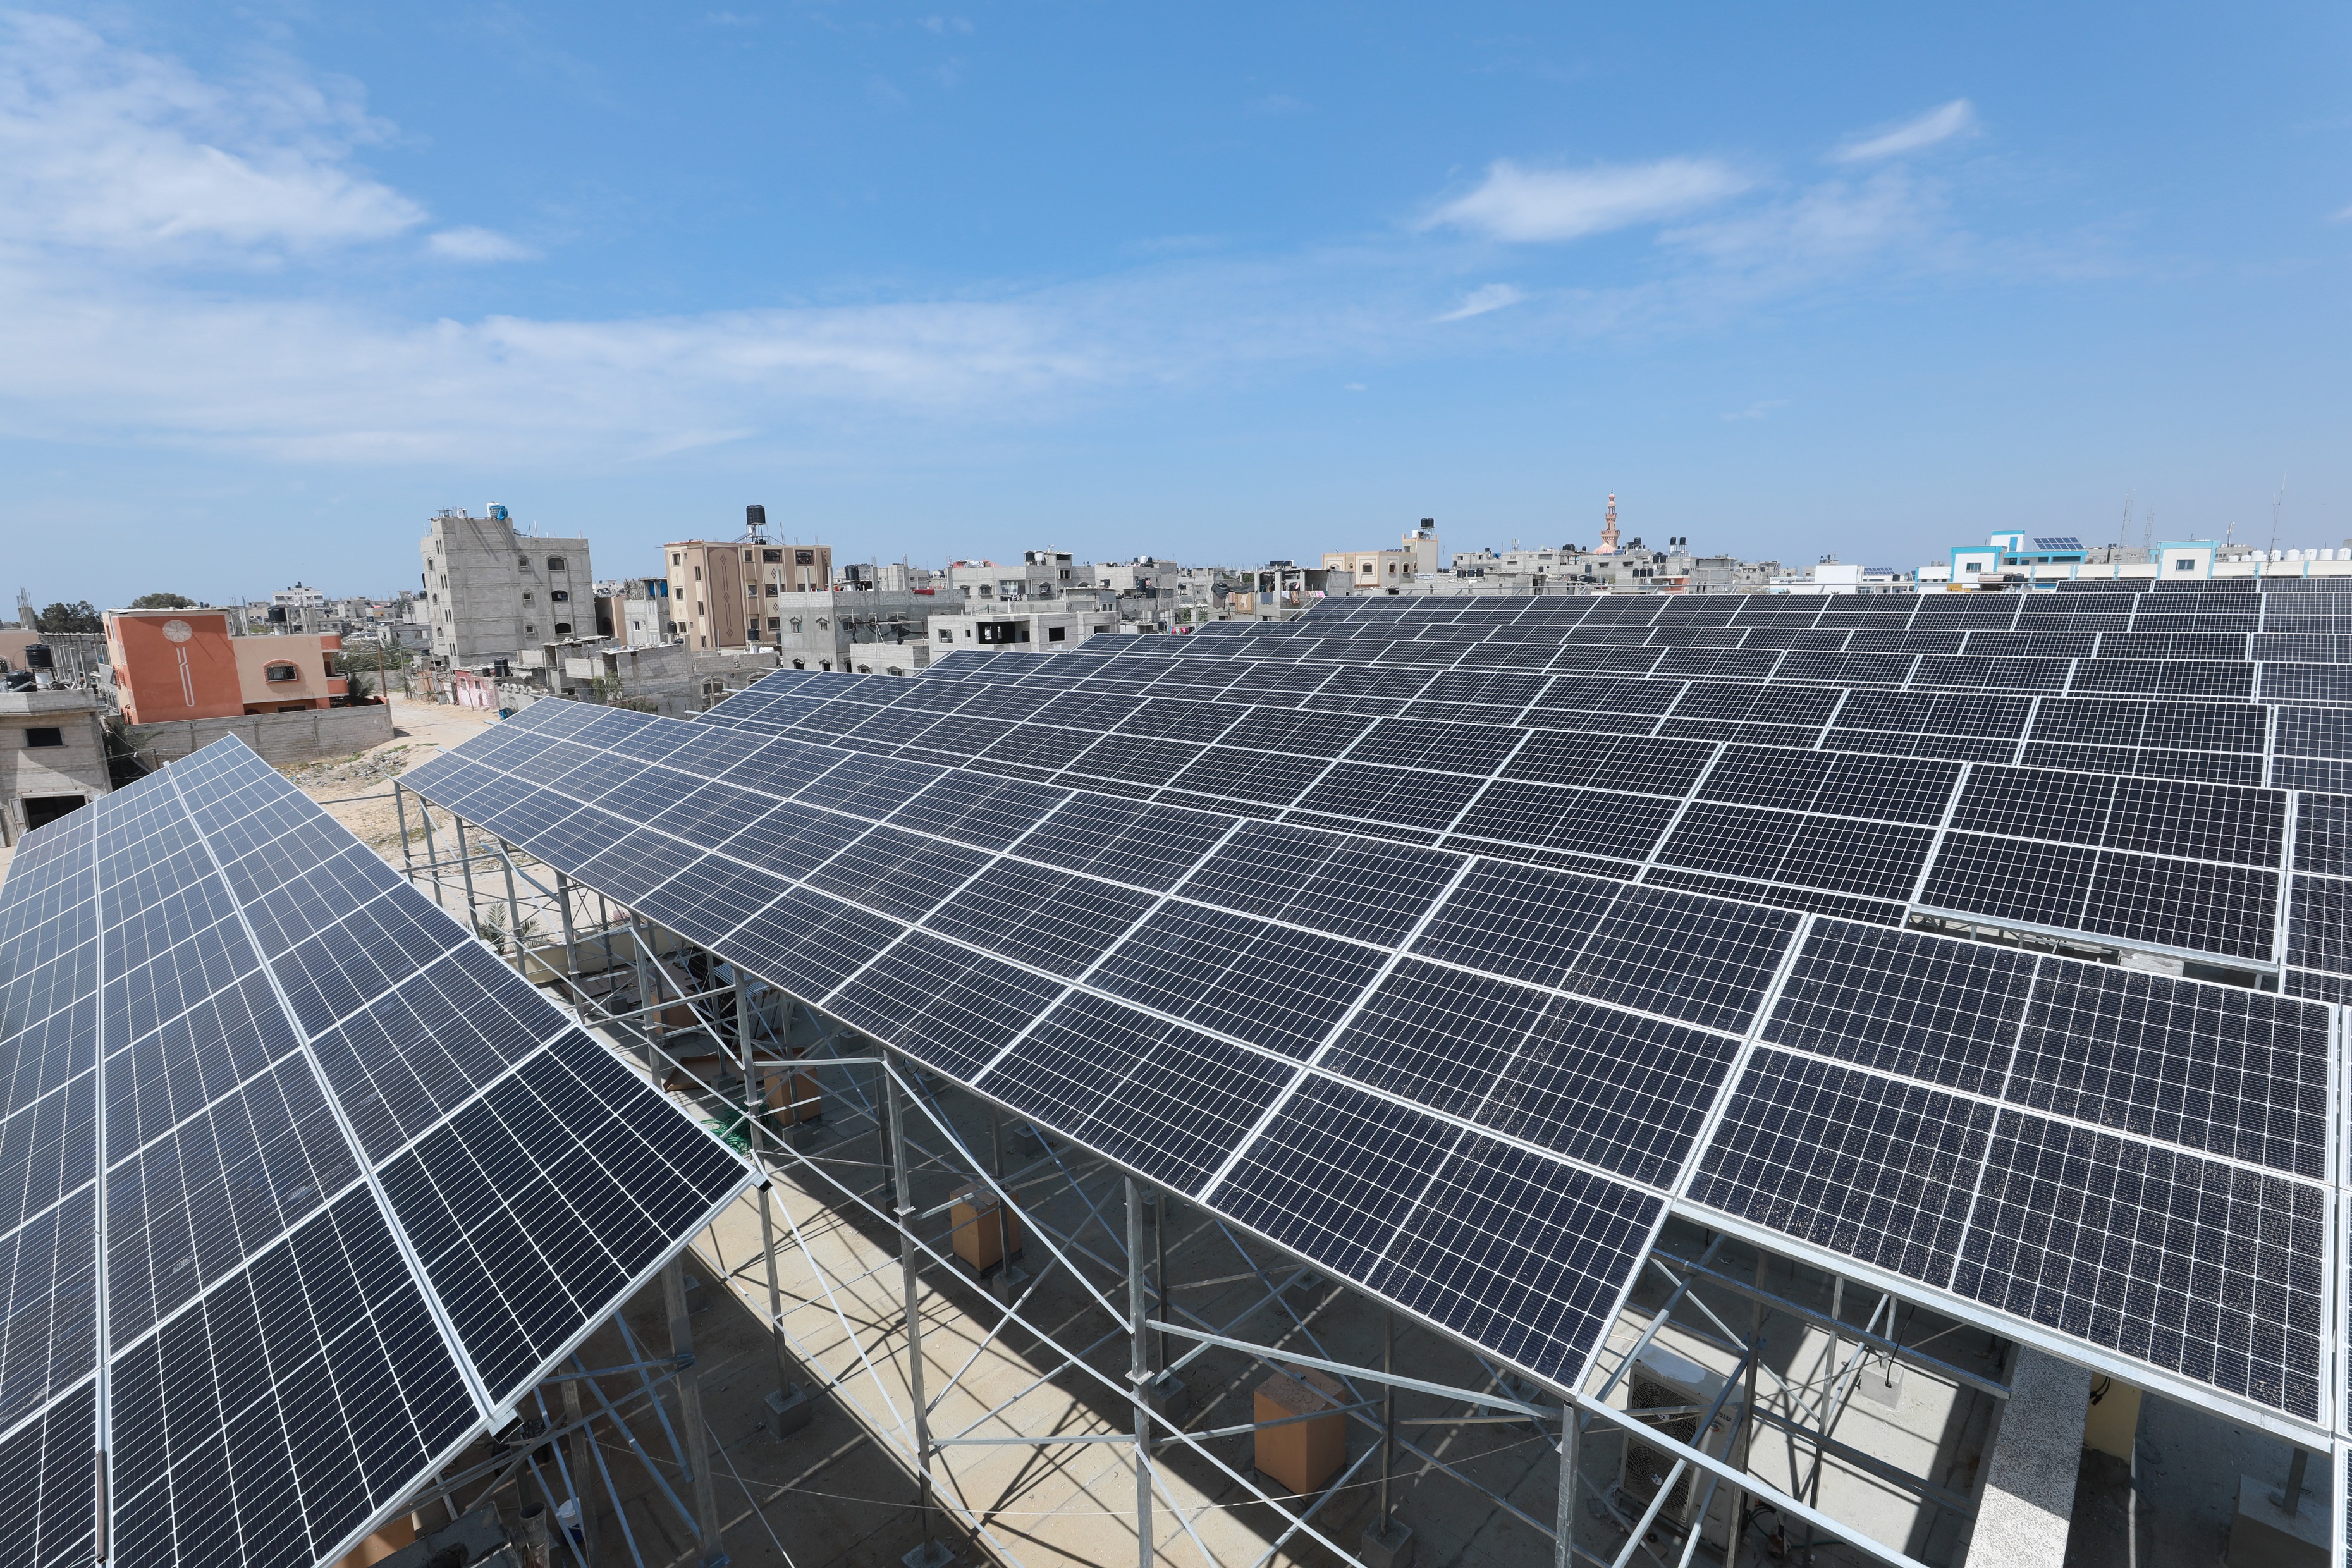 Powering health: WHO brings solar energy to the health sector in Gaza